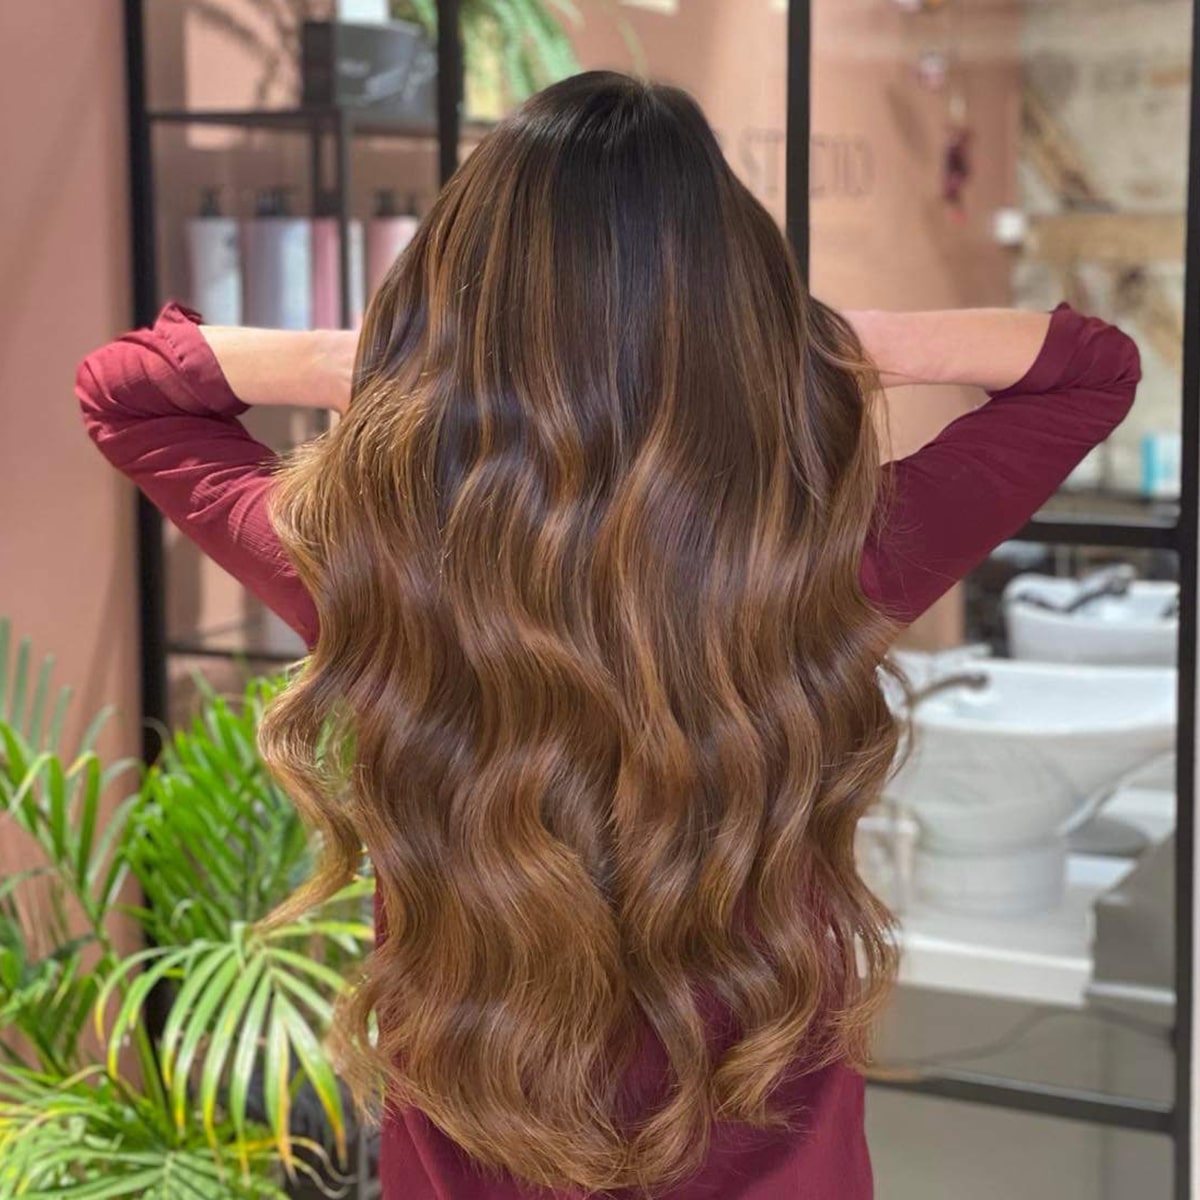 Tape extensions - Warm Brown Balayage 2+7